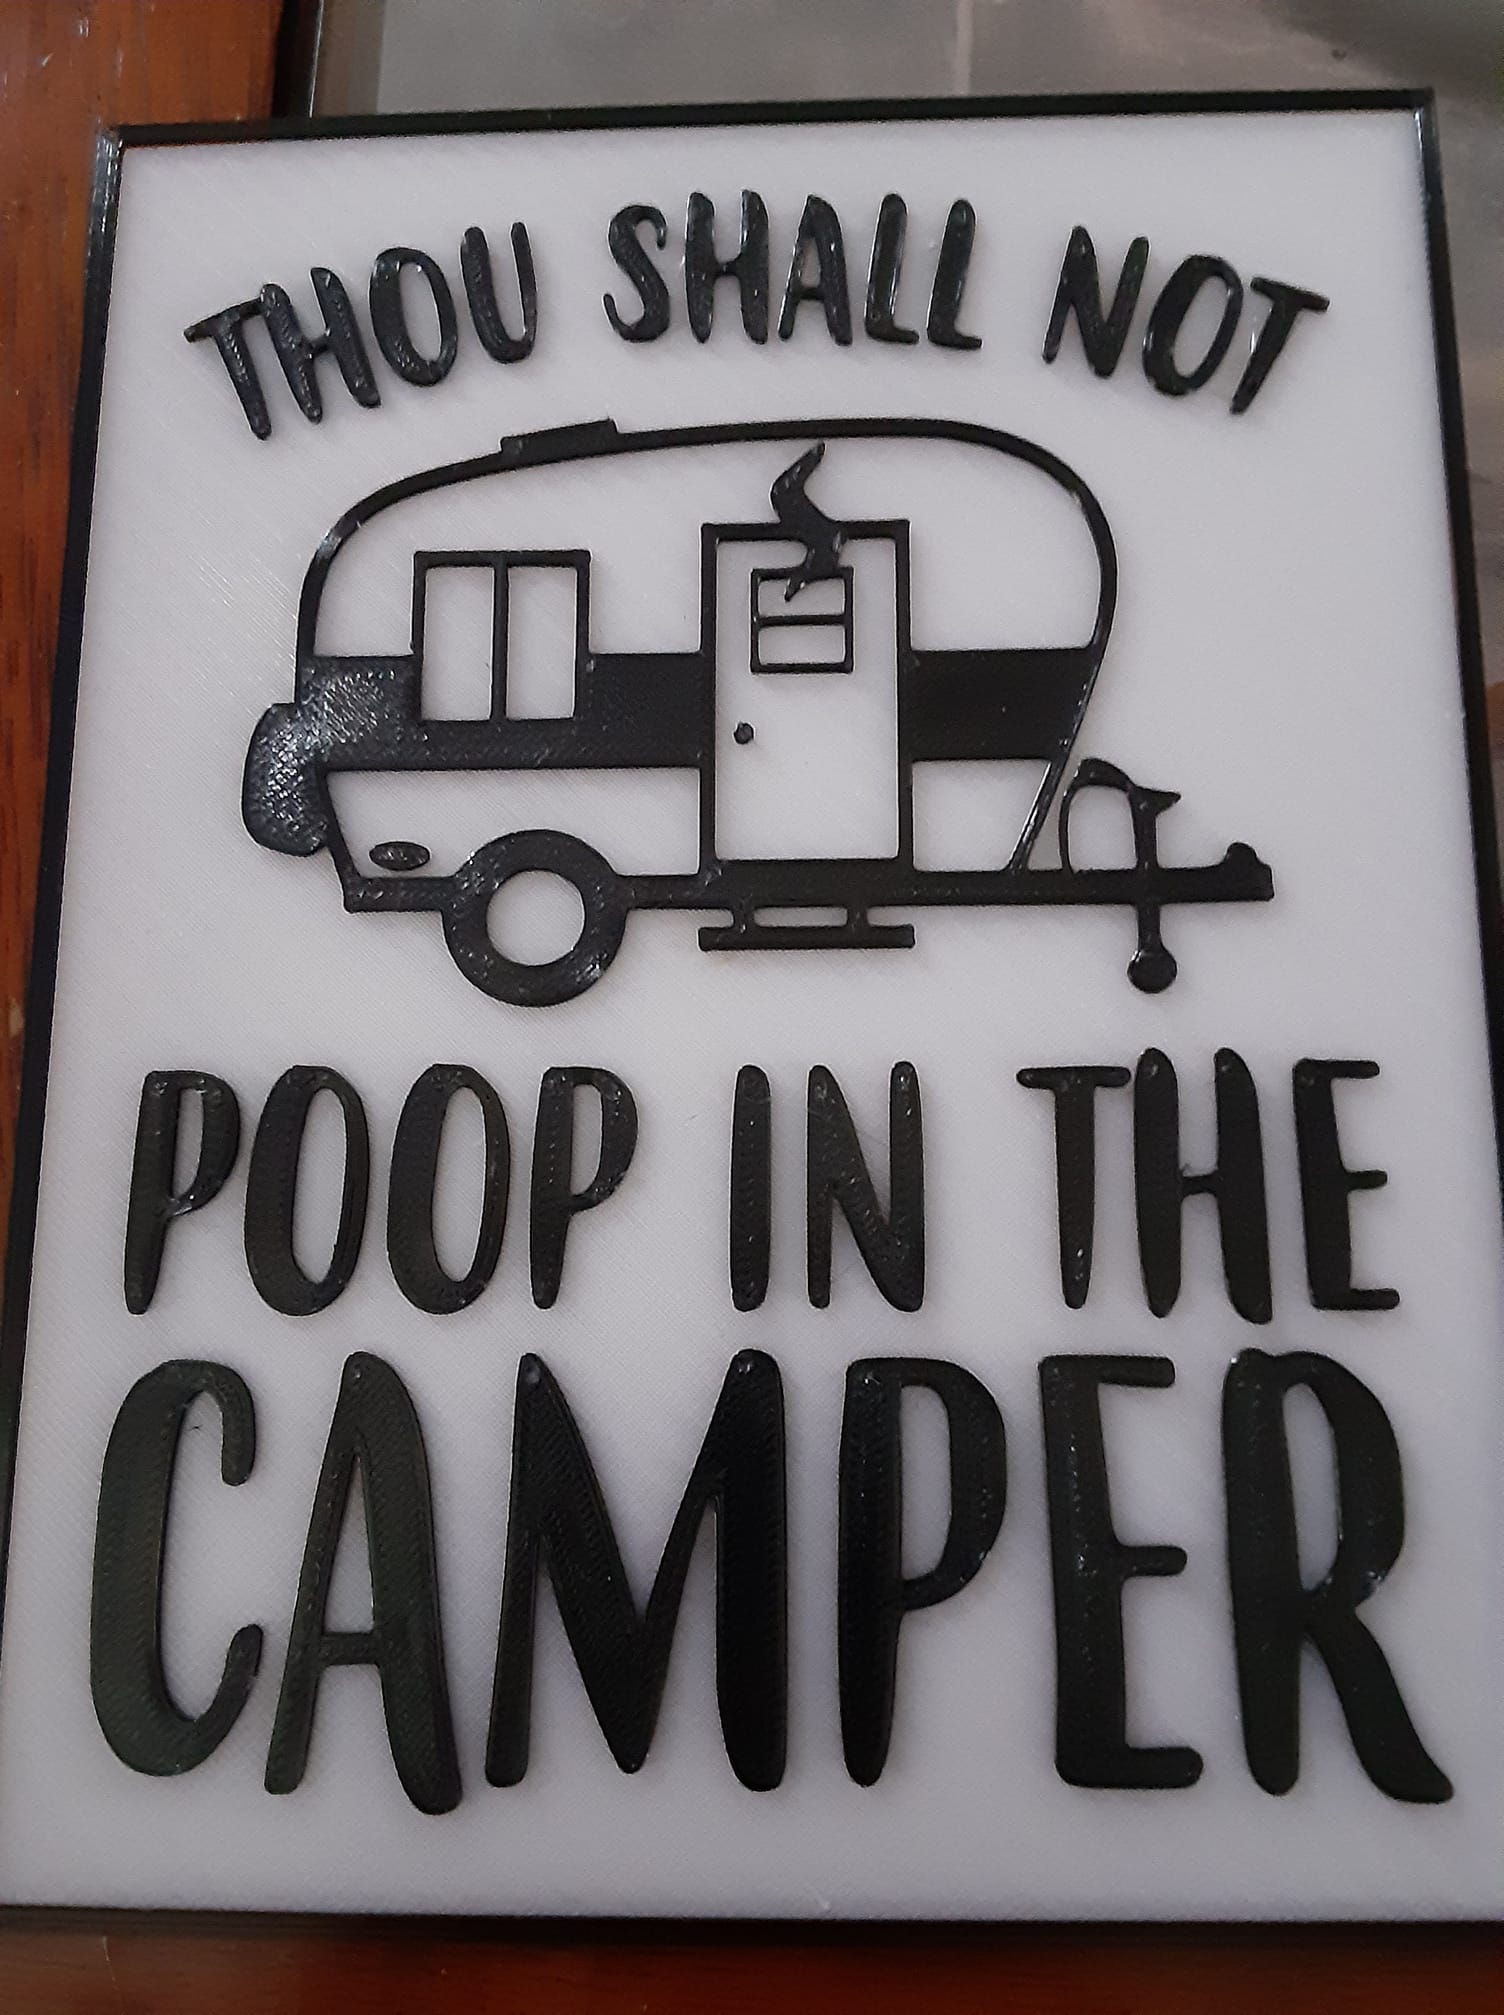 No Pooping in the camper